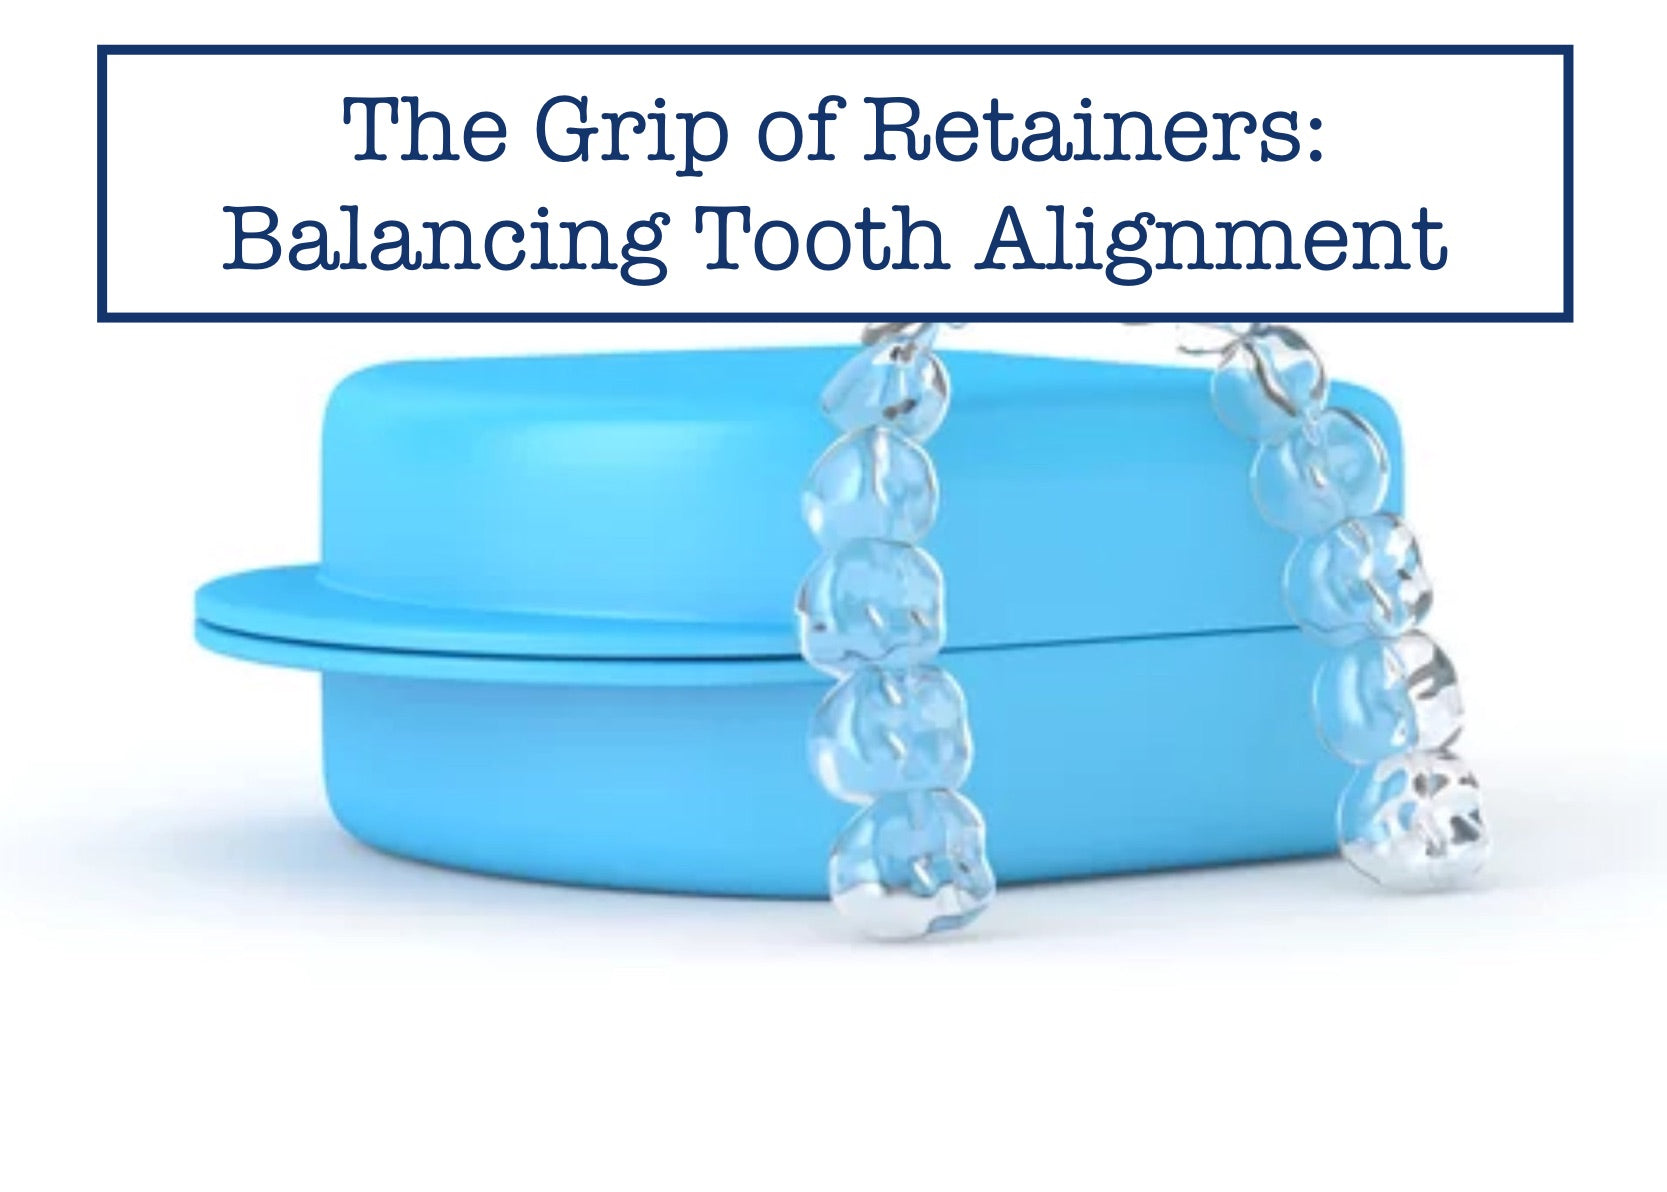 The Grip of Retainers: Balancing Tooth Alignment